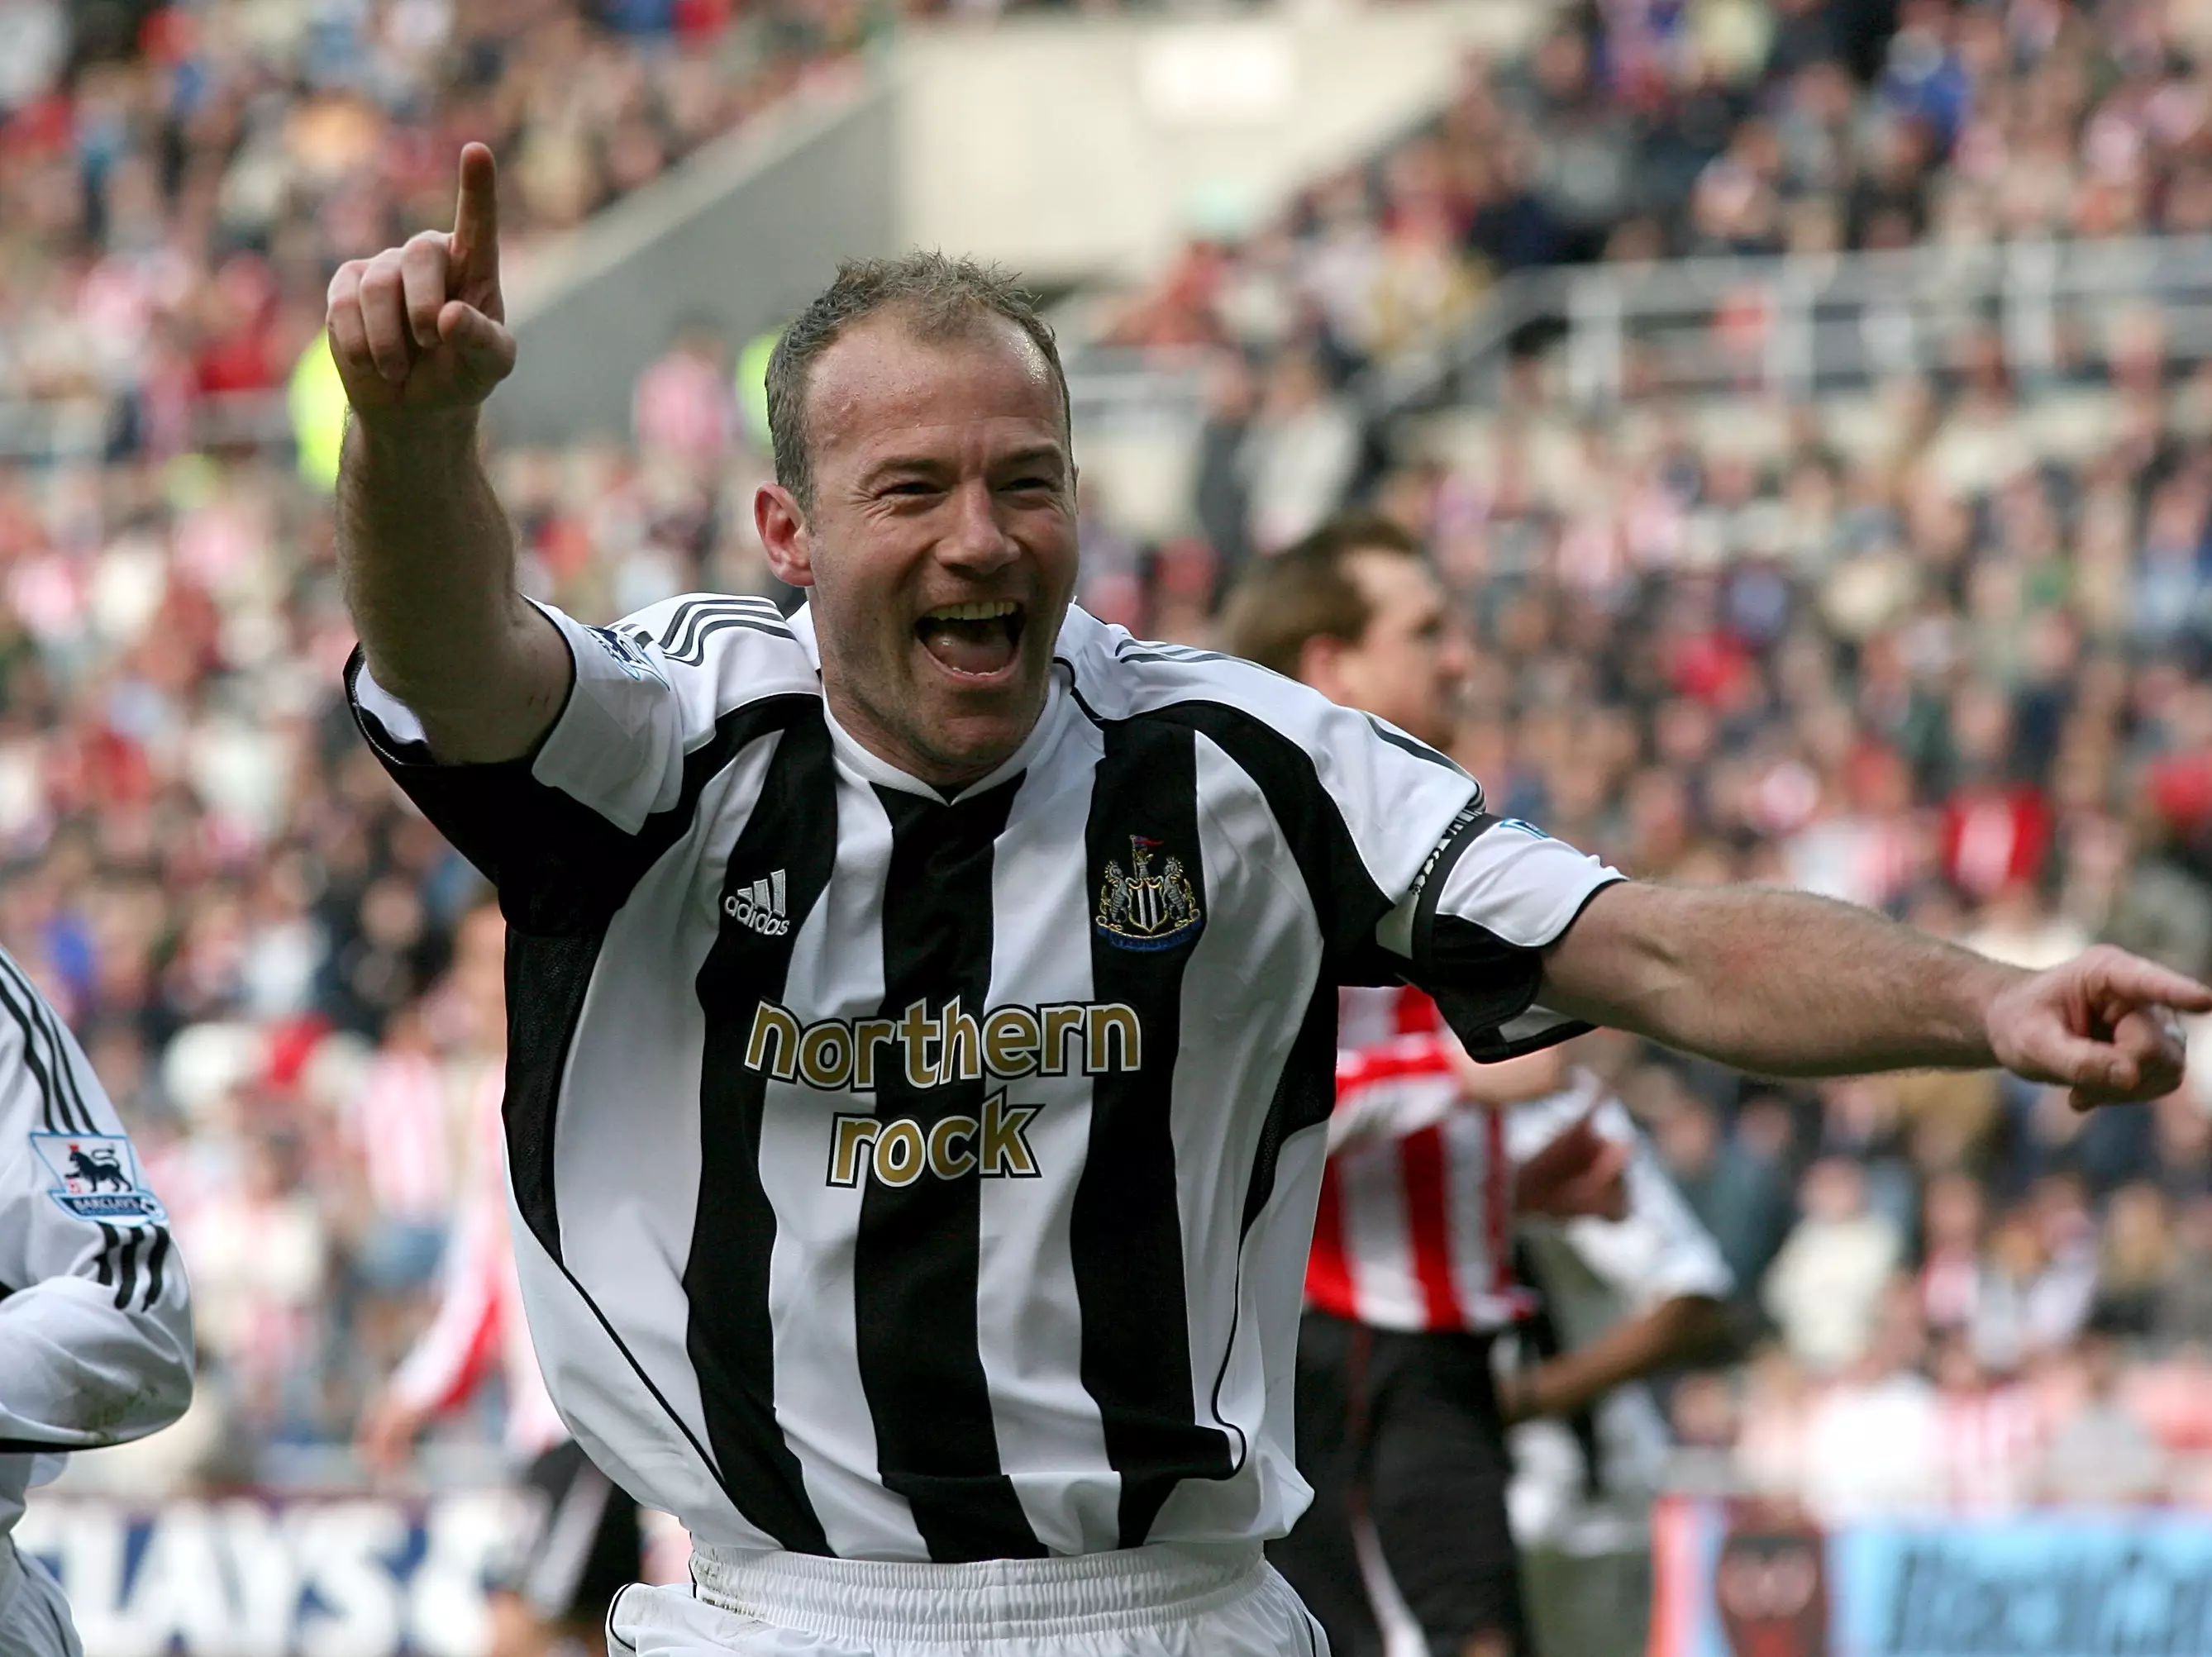 Shearer scored 260 times in the Premier League. Image: PA Images